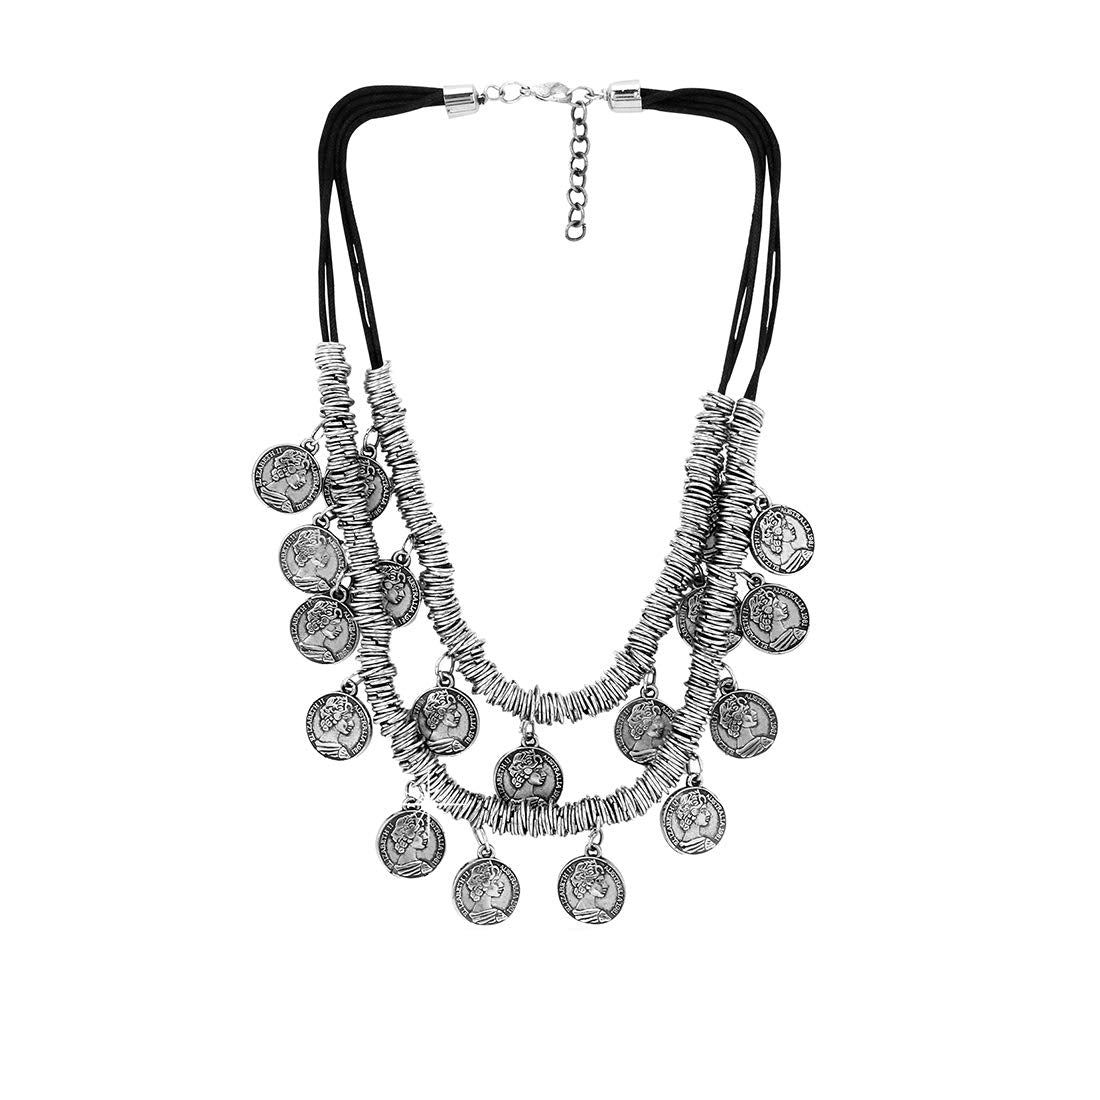 Yellow Chimes Oxidised Necklace for Women Silver Oxidised Crafted Bohemia Gypsy Coins Traditional Layered Necklace for Women and Girls.